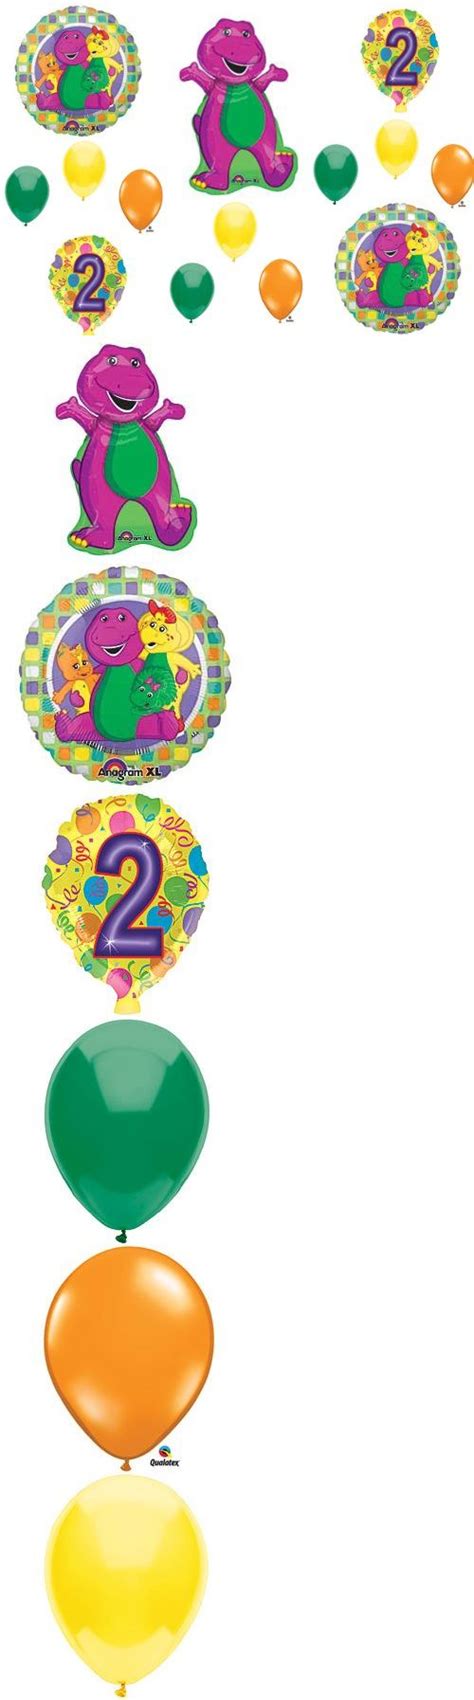 Barney 2nd Birthday Party Balloons Decorations Supplies Baby Bop This